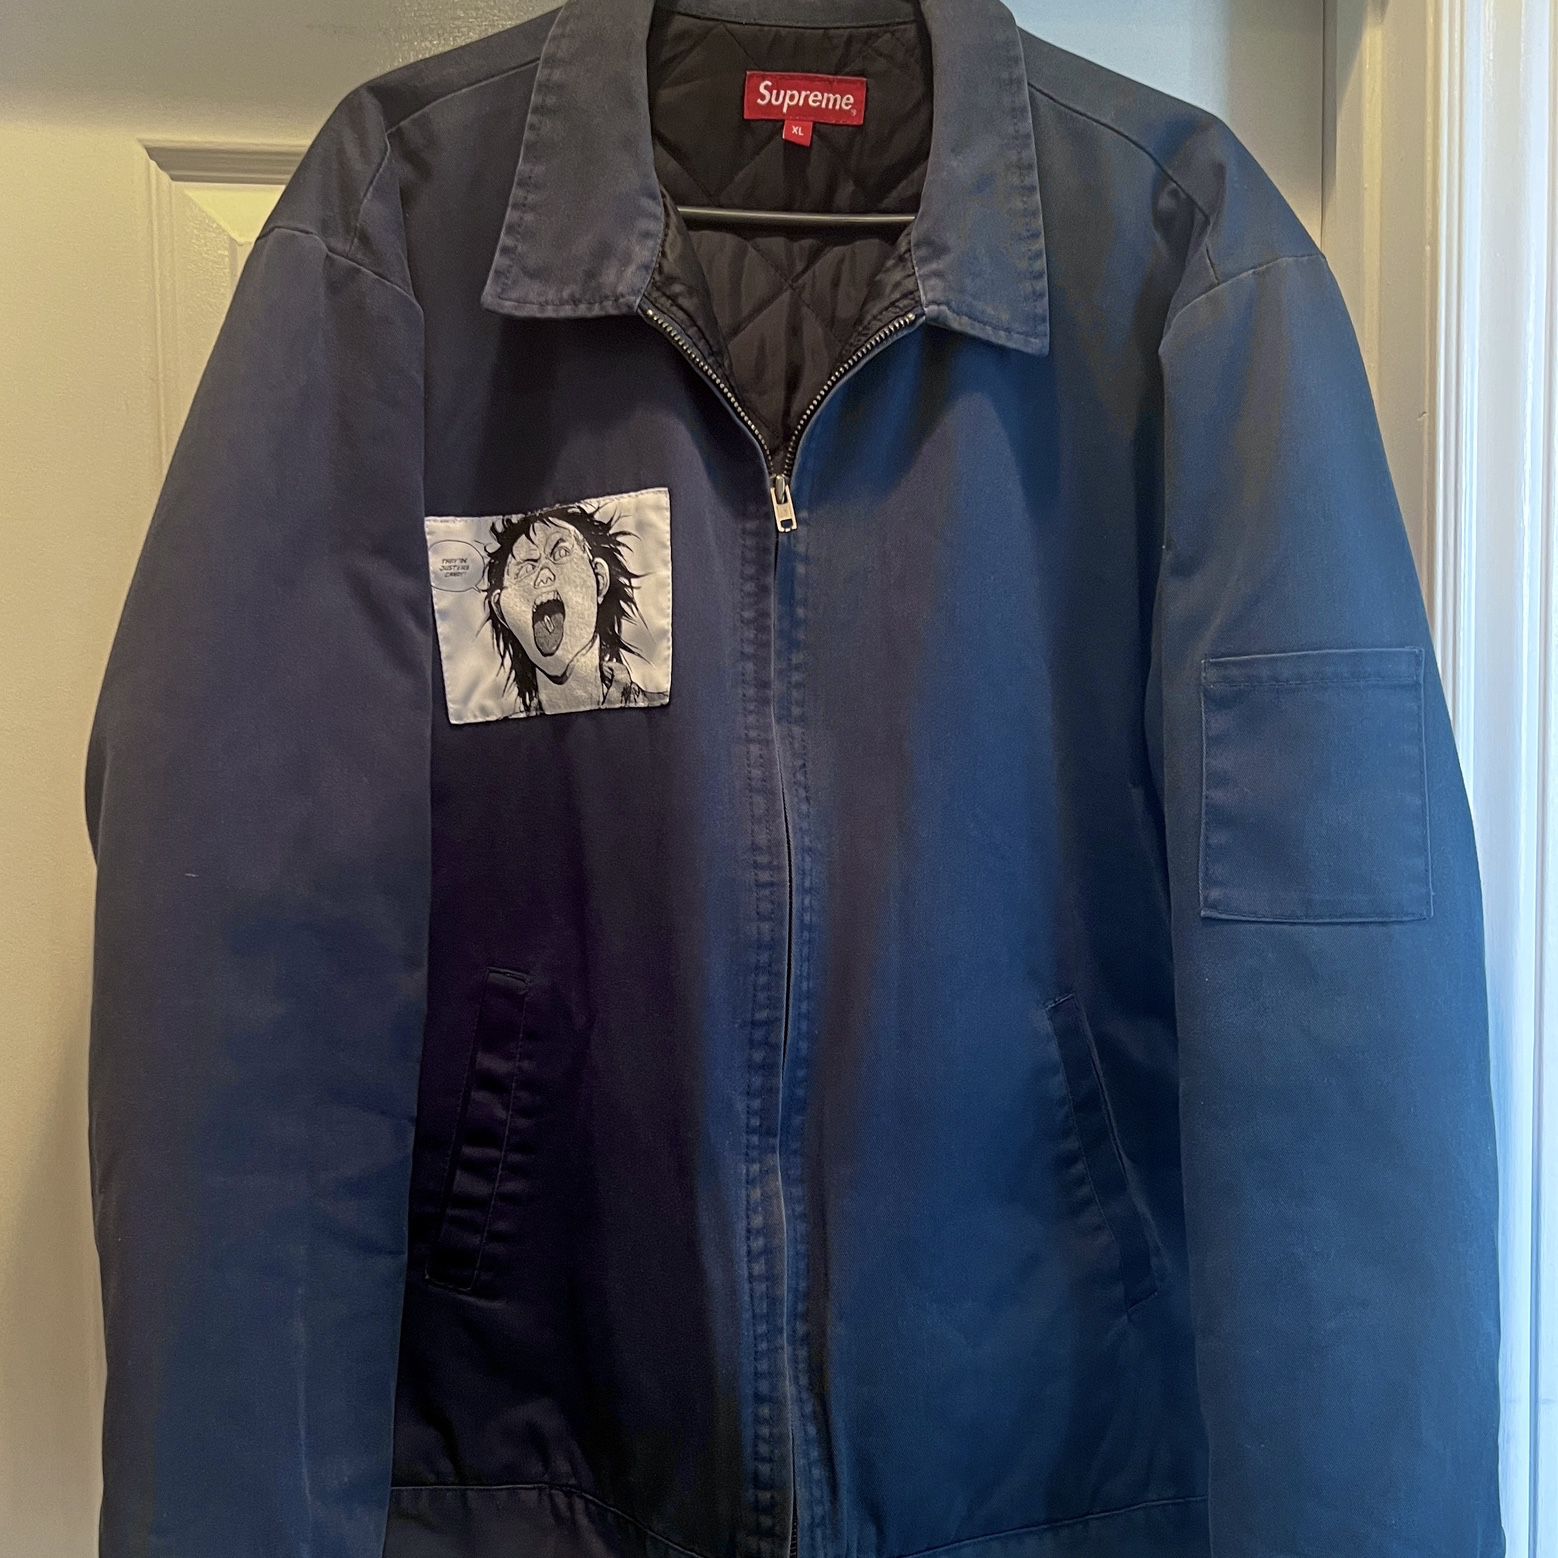 XL Supreme AKIRA Work Jacket - Like New - RARE for Sale in